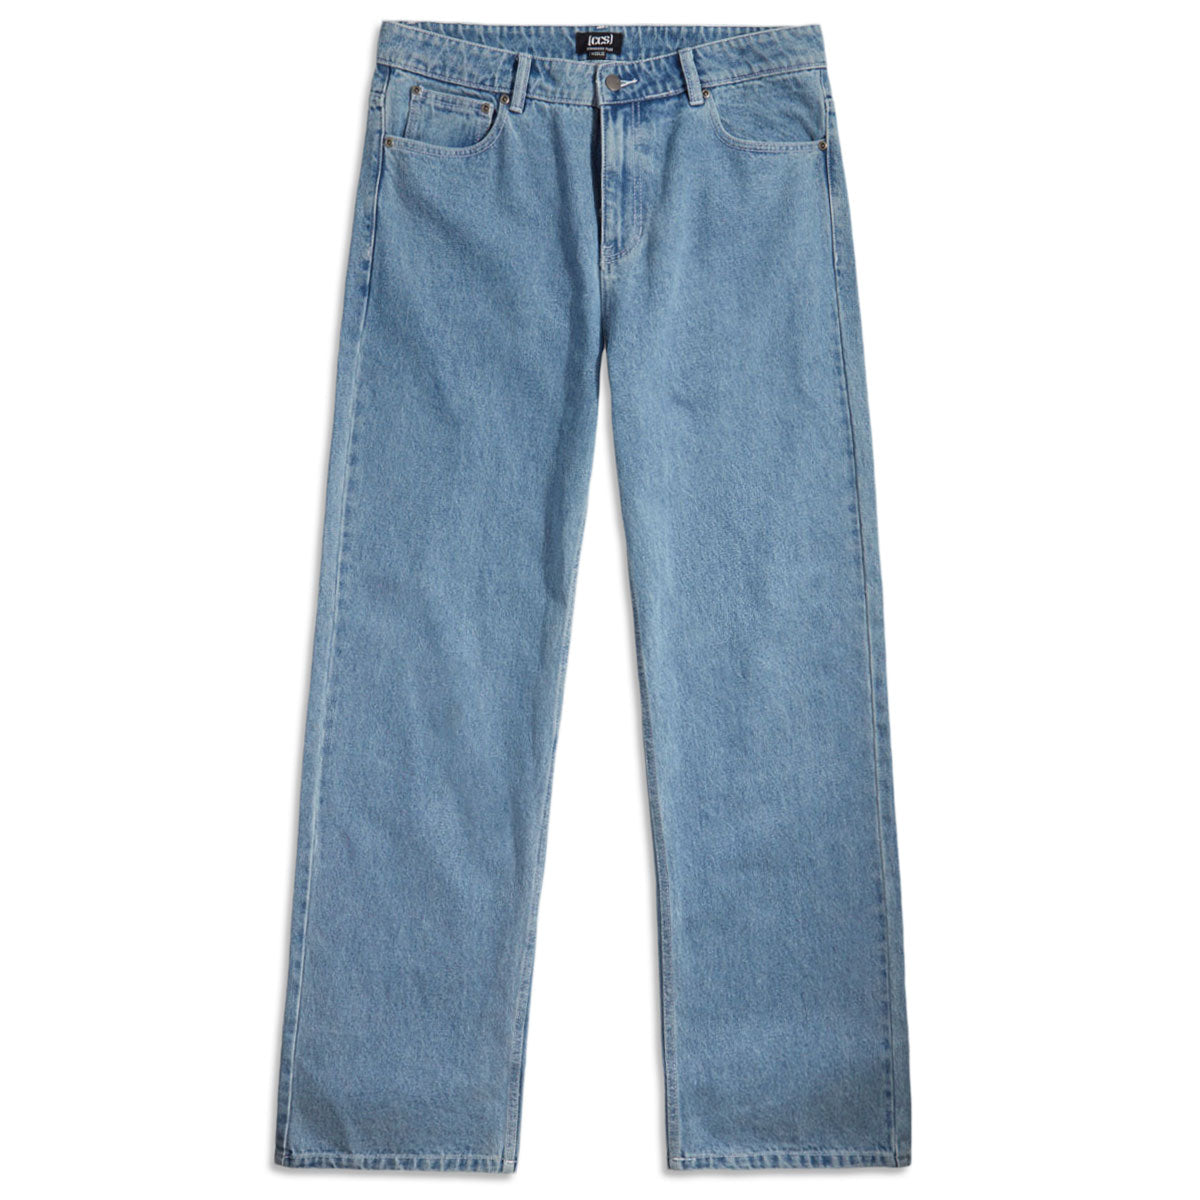 CCS Original Relaxed Denim Jeans - Rinsed Blue image 5